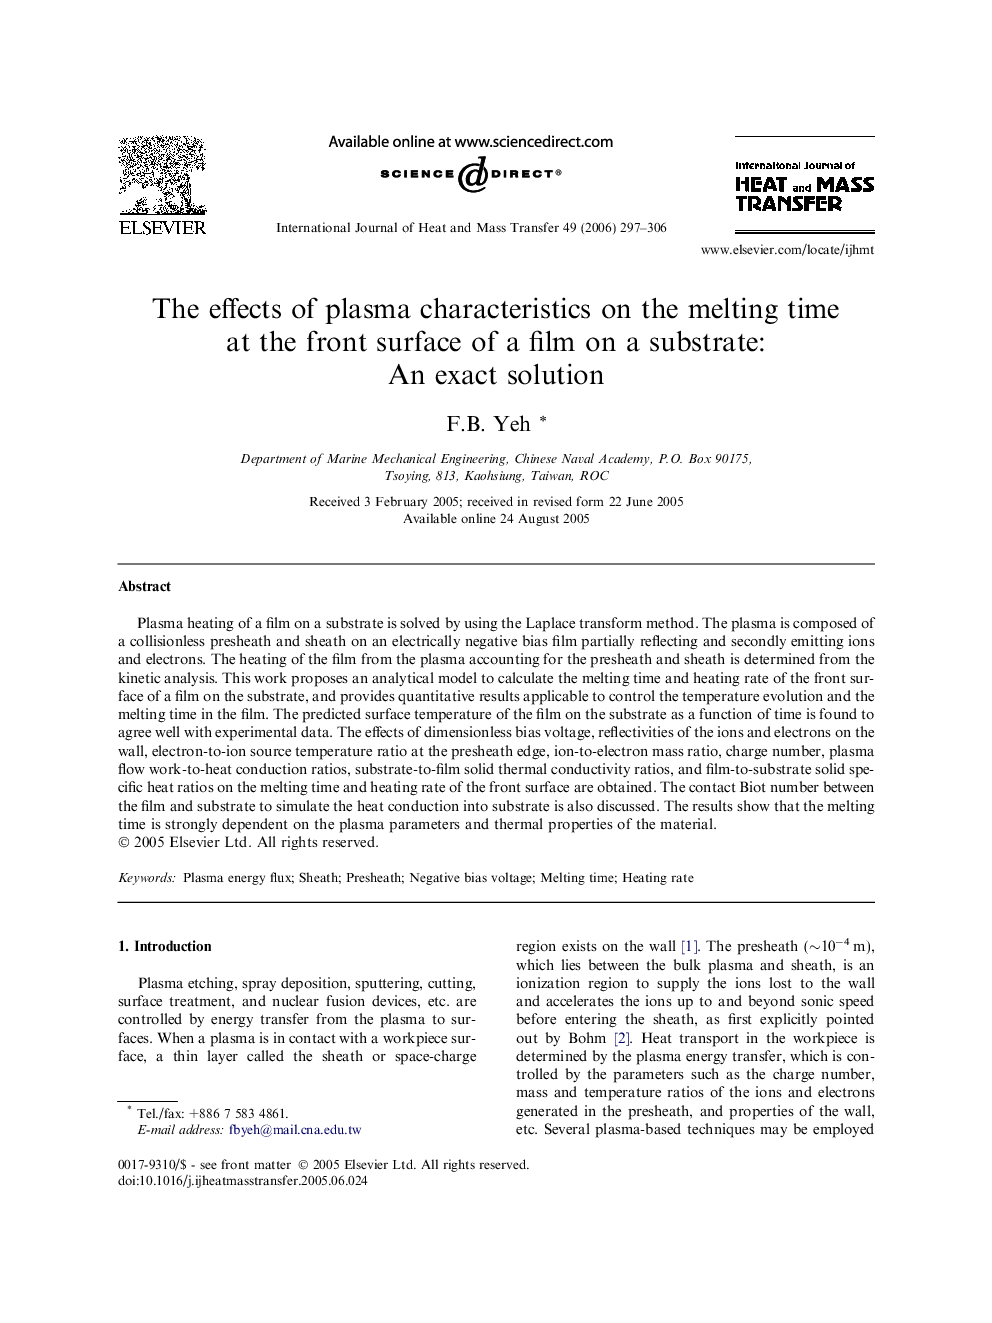 The effects of plasma characteristics on the melting time at the front surface of a film on a substrate: An exact solution